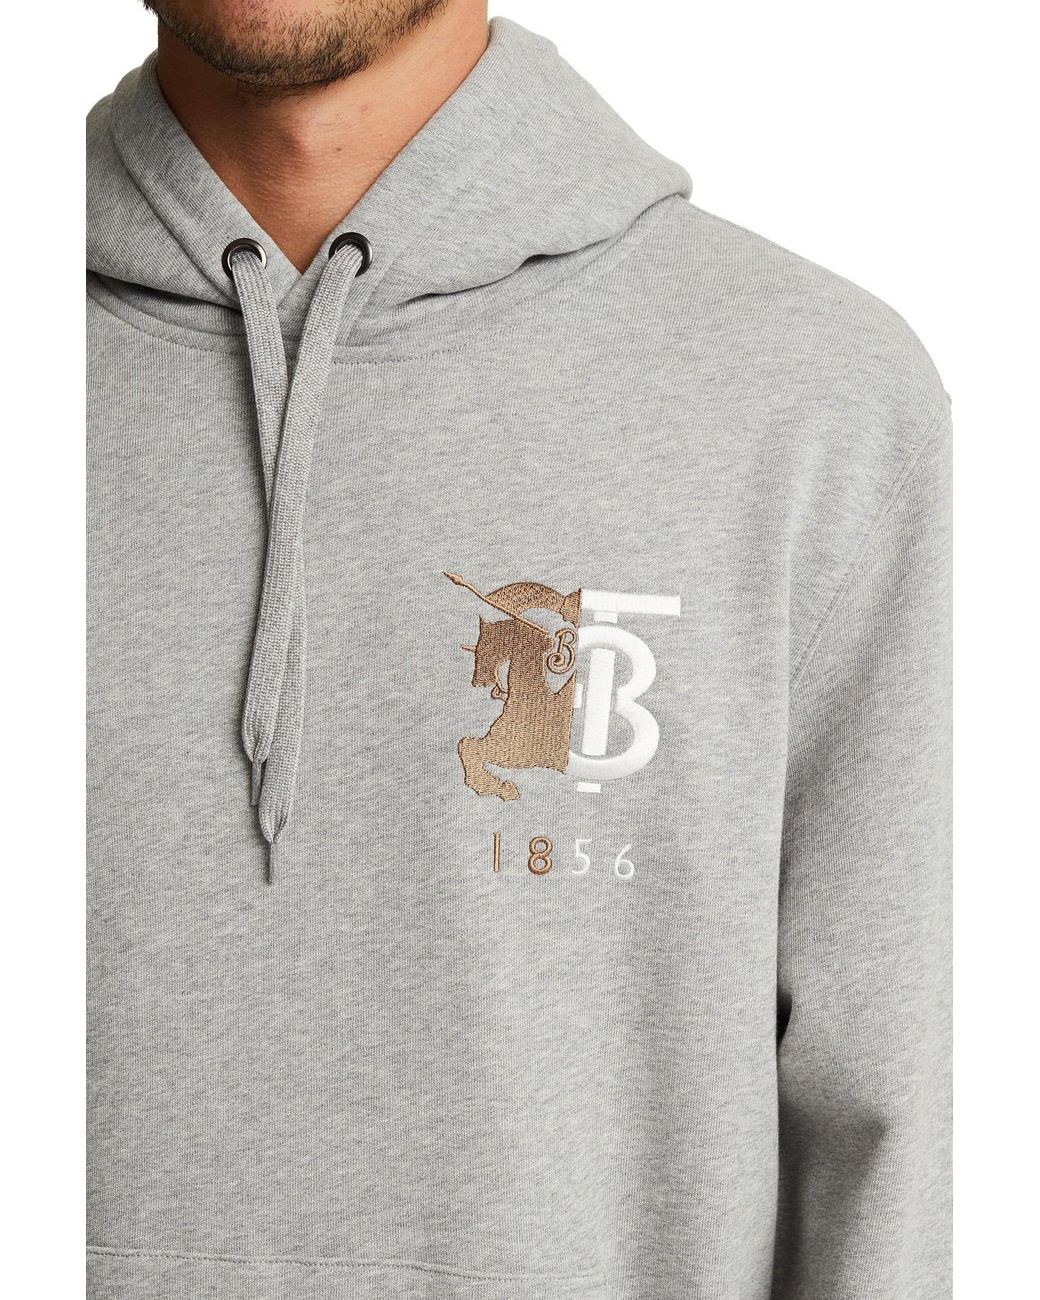 Burberry 1856 Embroidered Logo Hoodie in Gray | Lyst